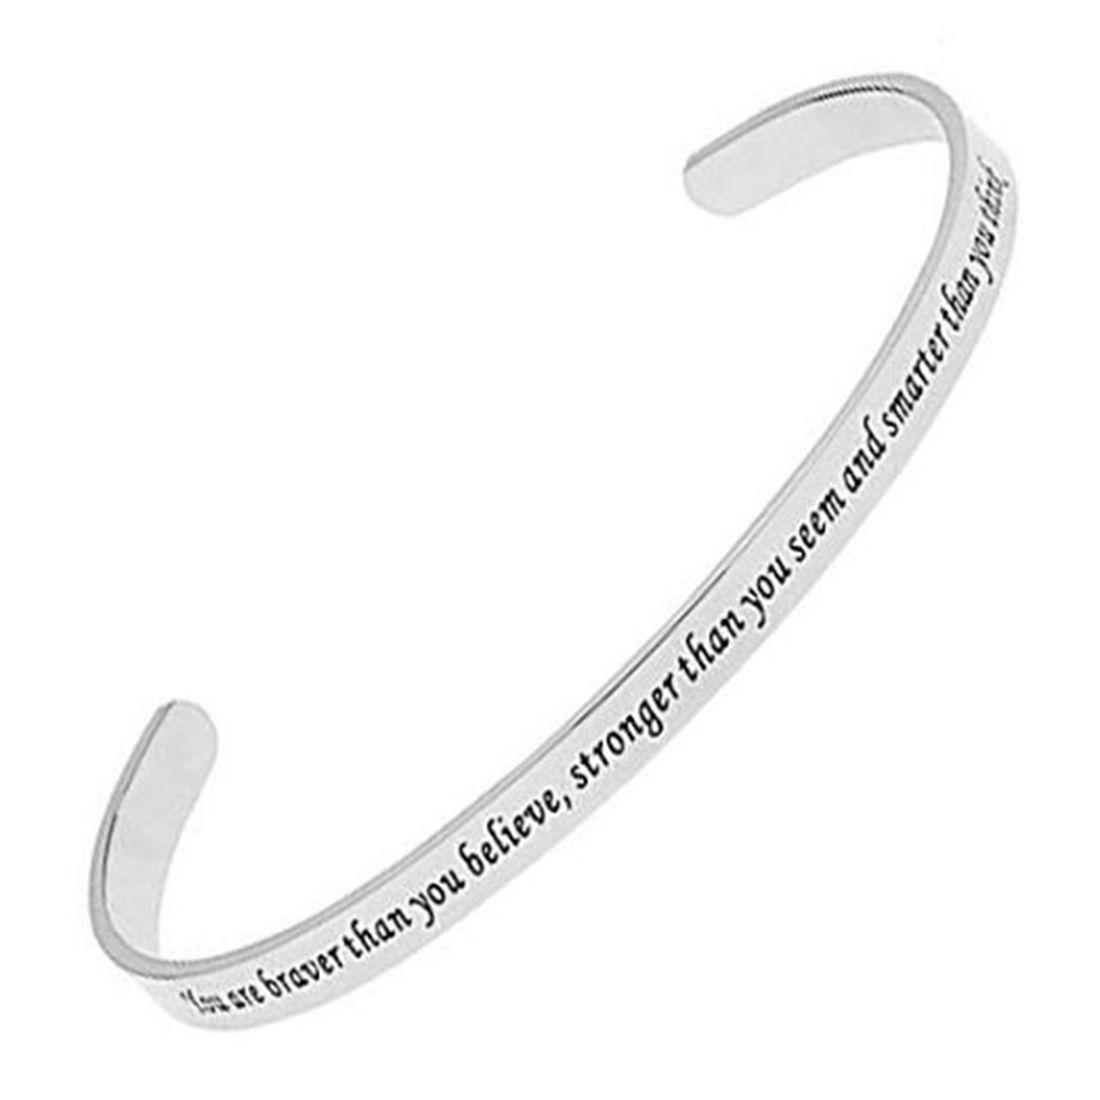 Keep Going Inspirational Bracelet Cuff Bangle Mantra Quote Stainless Steel Engraved Motivational Friend Encouragement Jewelry Gift for Women Teen Girls Sister with Secret Message 